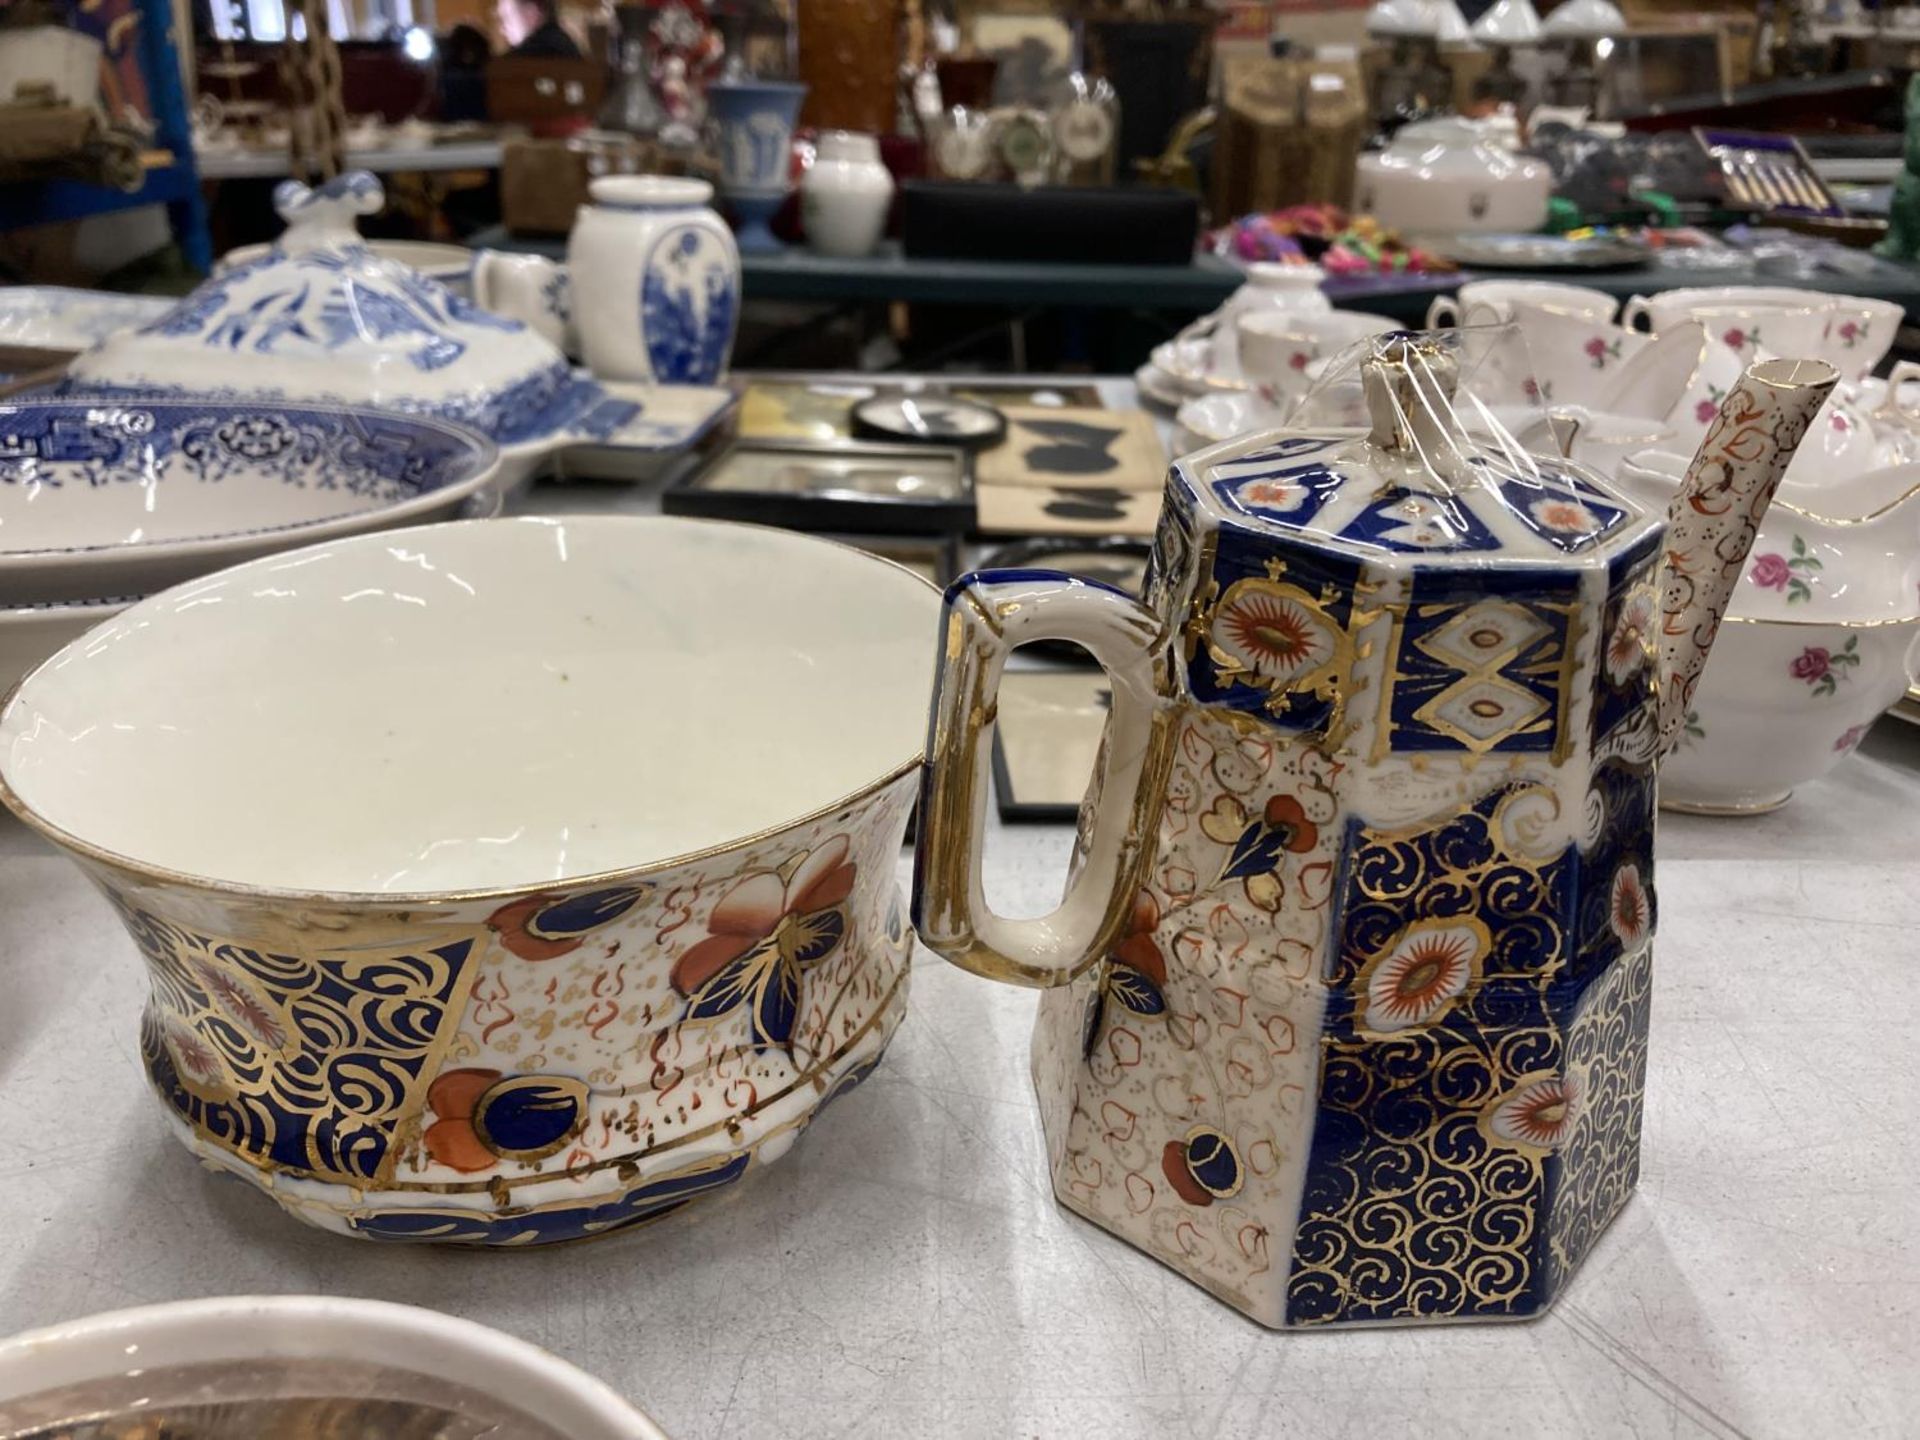 NINE PIECES OF DAVENPORT 'IMARI' PATTERN TO INCLUDE A SMALL COFFEE POT, CUP AND SAUCER, PLATES, - Image 3 of 4